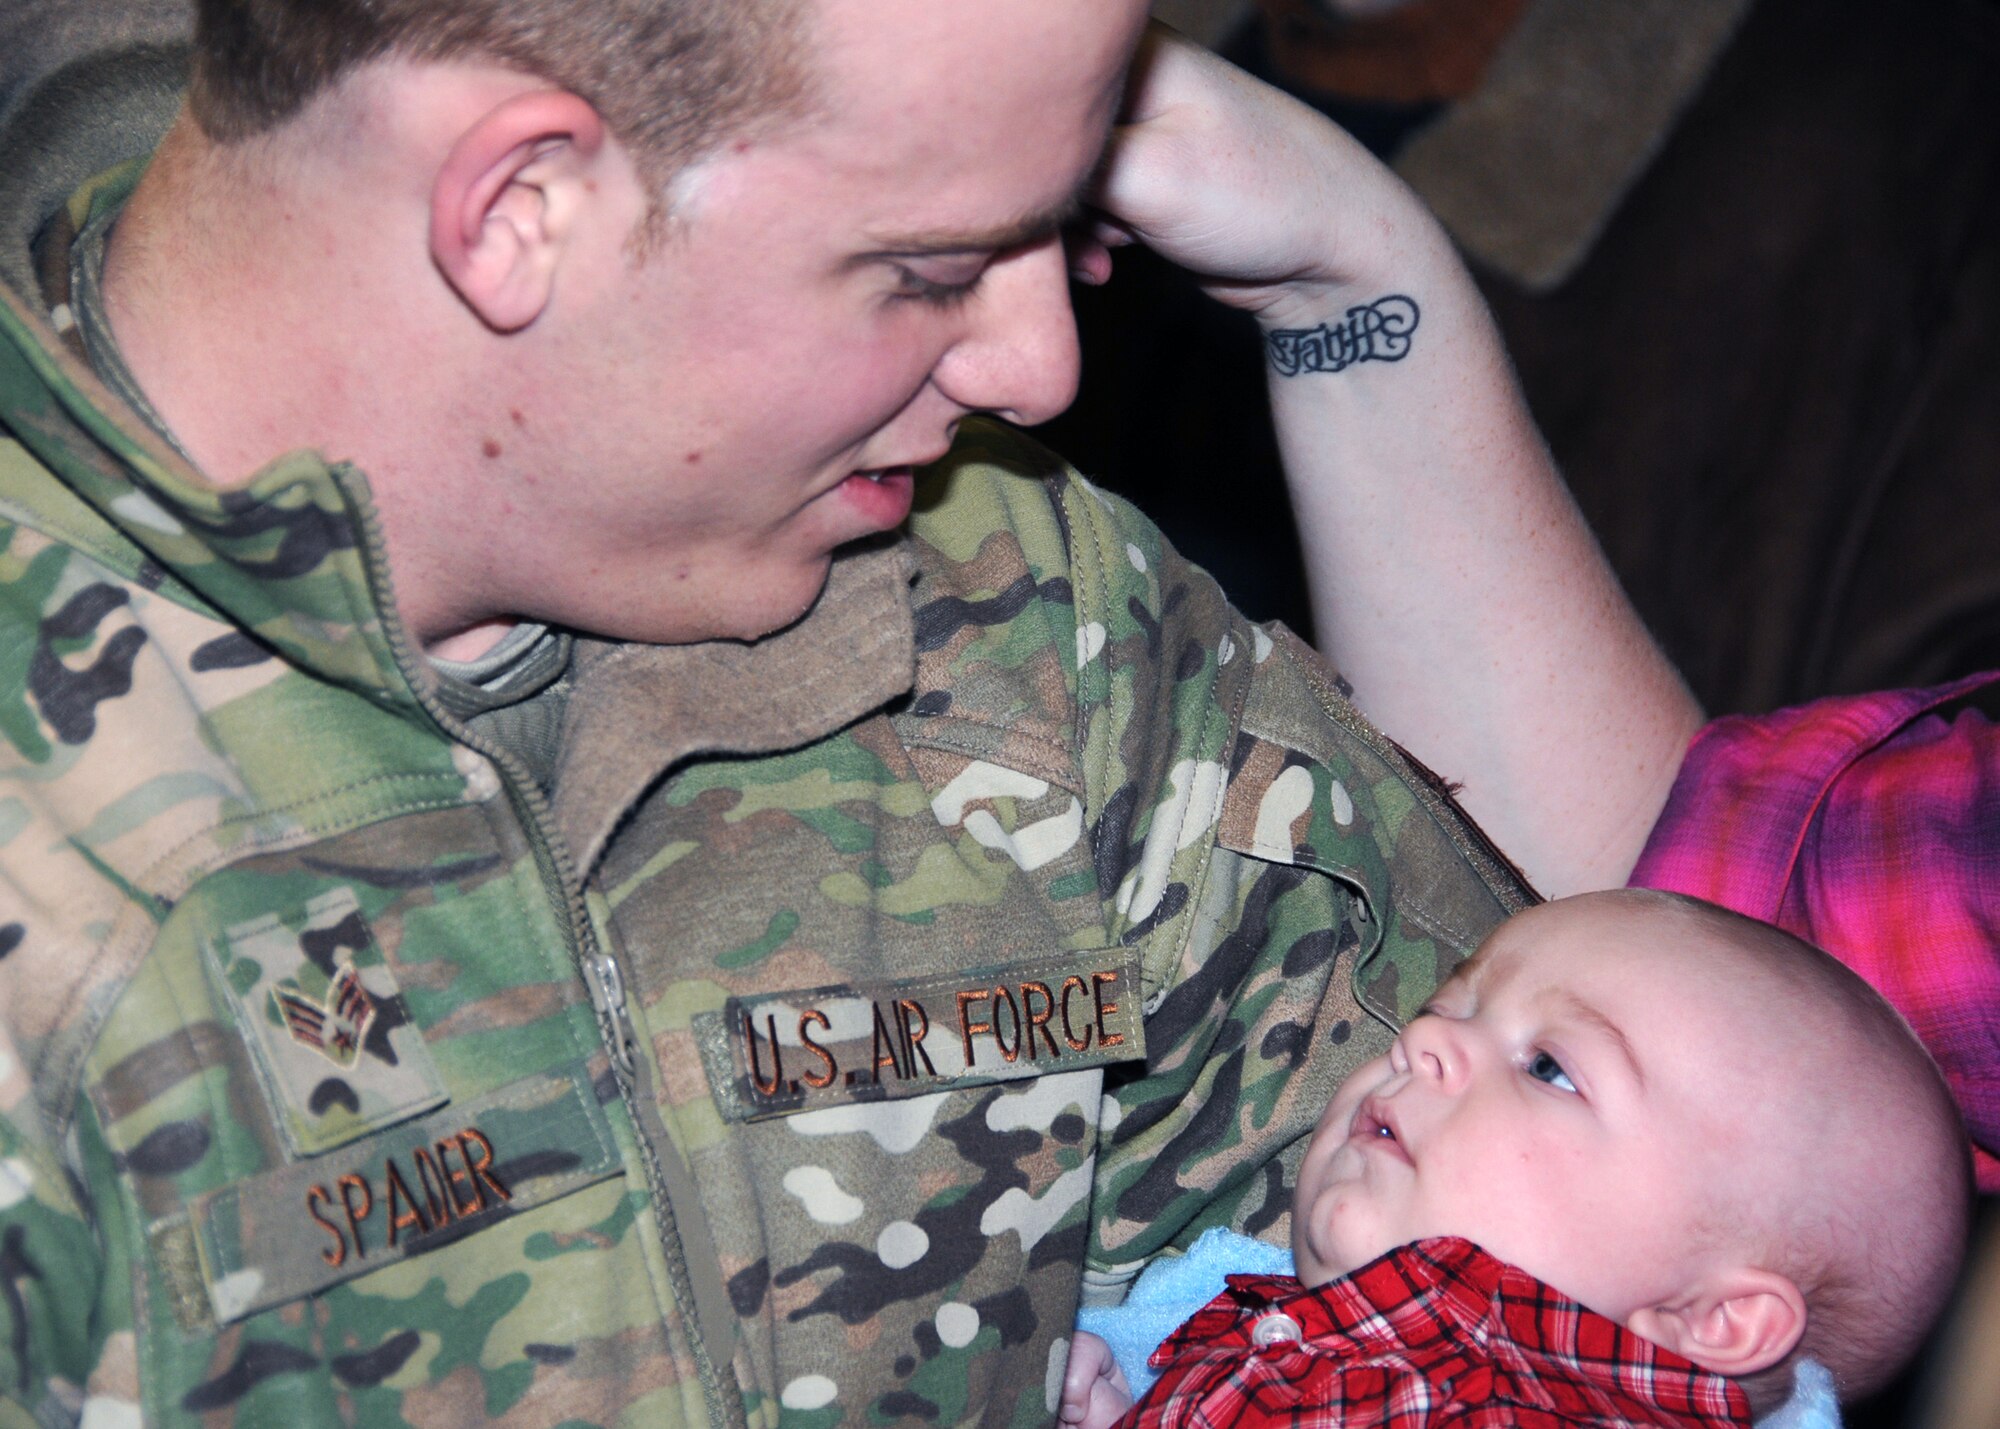 Airman First Class Dalton Spader meets his son Gavin for the first time upon return from a deployment to Kuwait. Gavin was born while Airman Spader was deployed. Airmen from the 143d Airlift Wing Operations Group, Maintenance Group and Logistics Readiness Squadron were deployed in support of Operation Enduring Freedom. National Guard Photo by Master Sgt John McDonald (RELEASED)